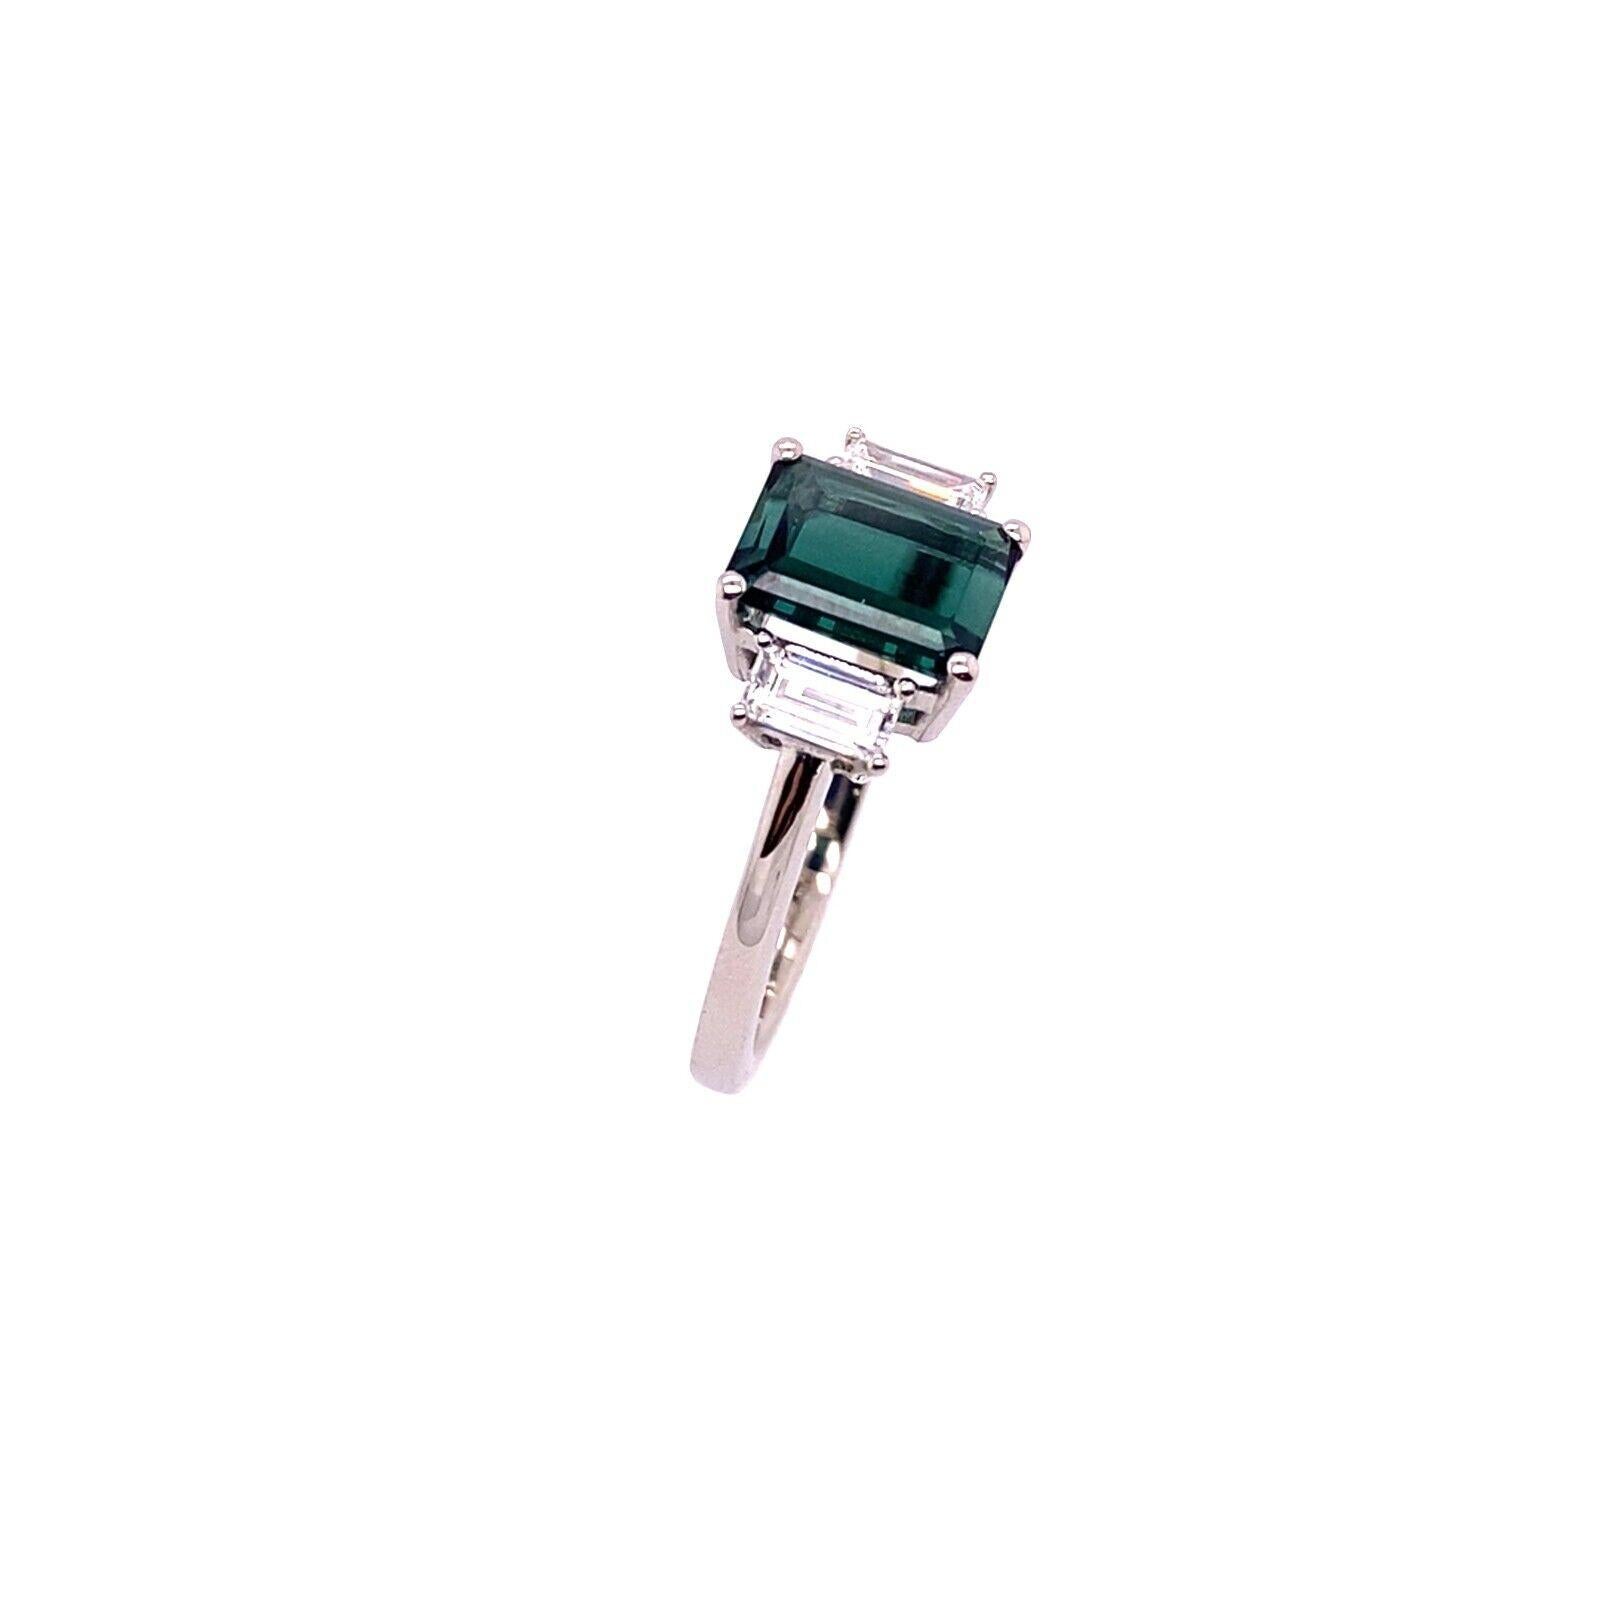 1.46ct Emerald Cut Green Tourmaline With Matching Baguette Diamonds 3-Stone Ring
This elegant 3-stone ring features an 1.46ct Emerald cut green Tourmaline centre stone, with 2 matching baguette Diamonds on each side, 0.36ct in total. Set in a